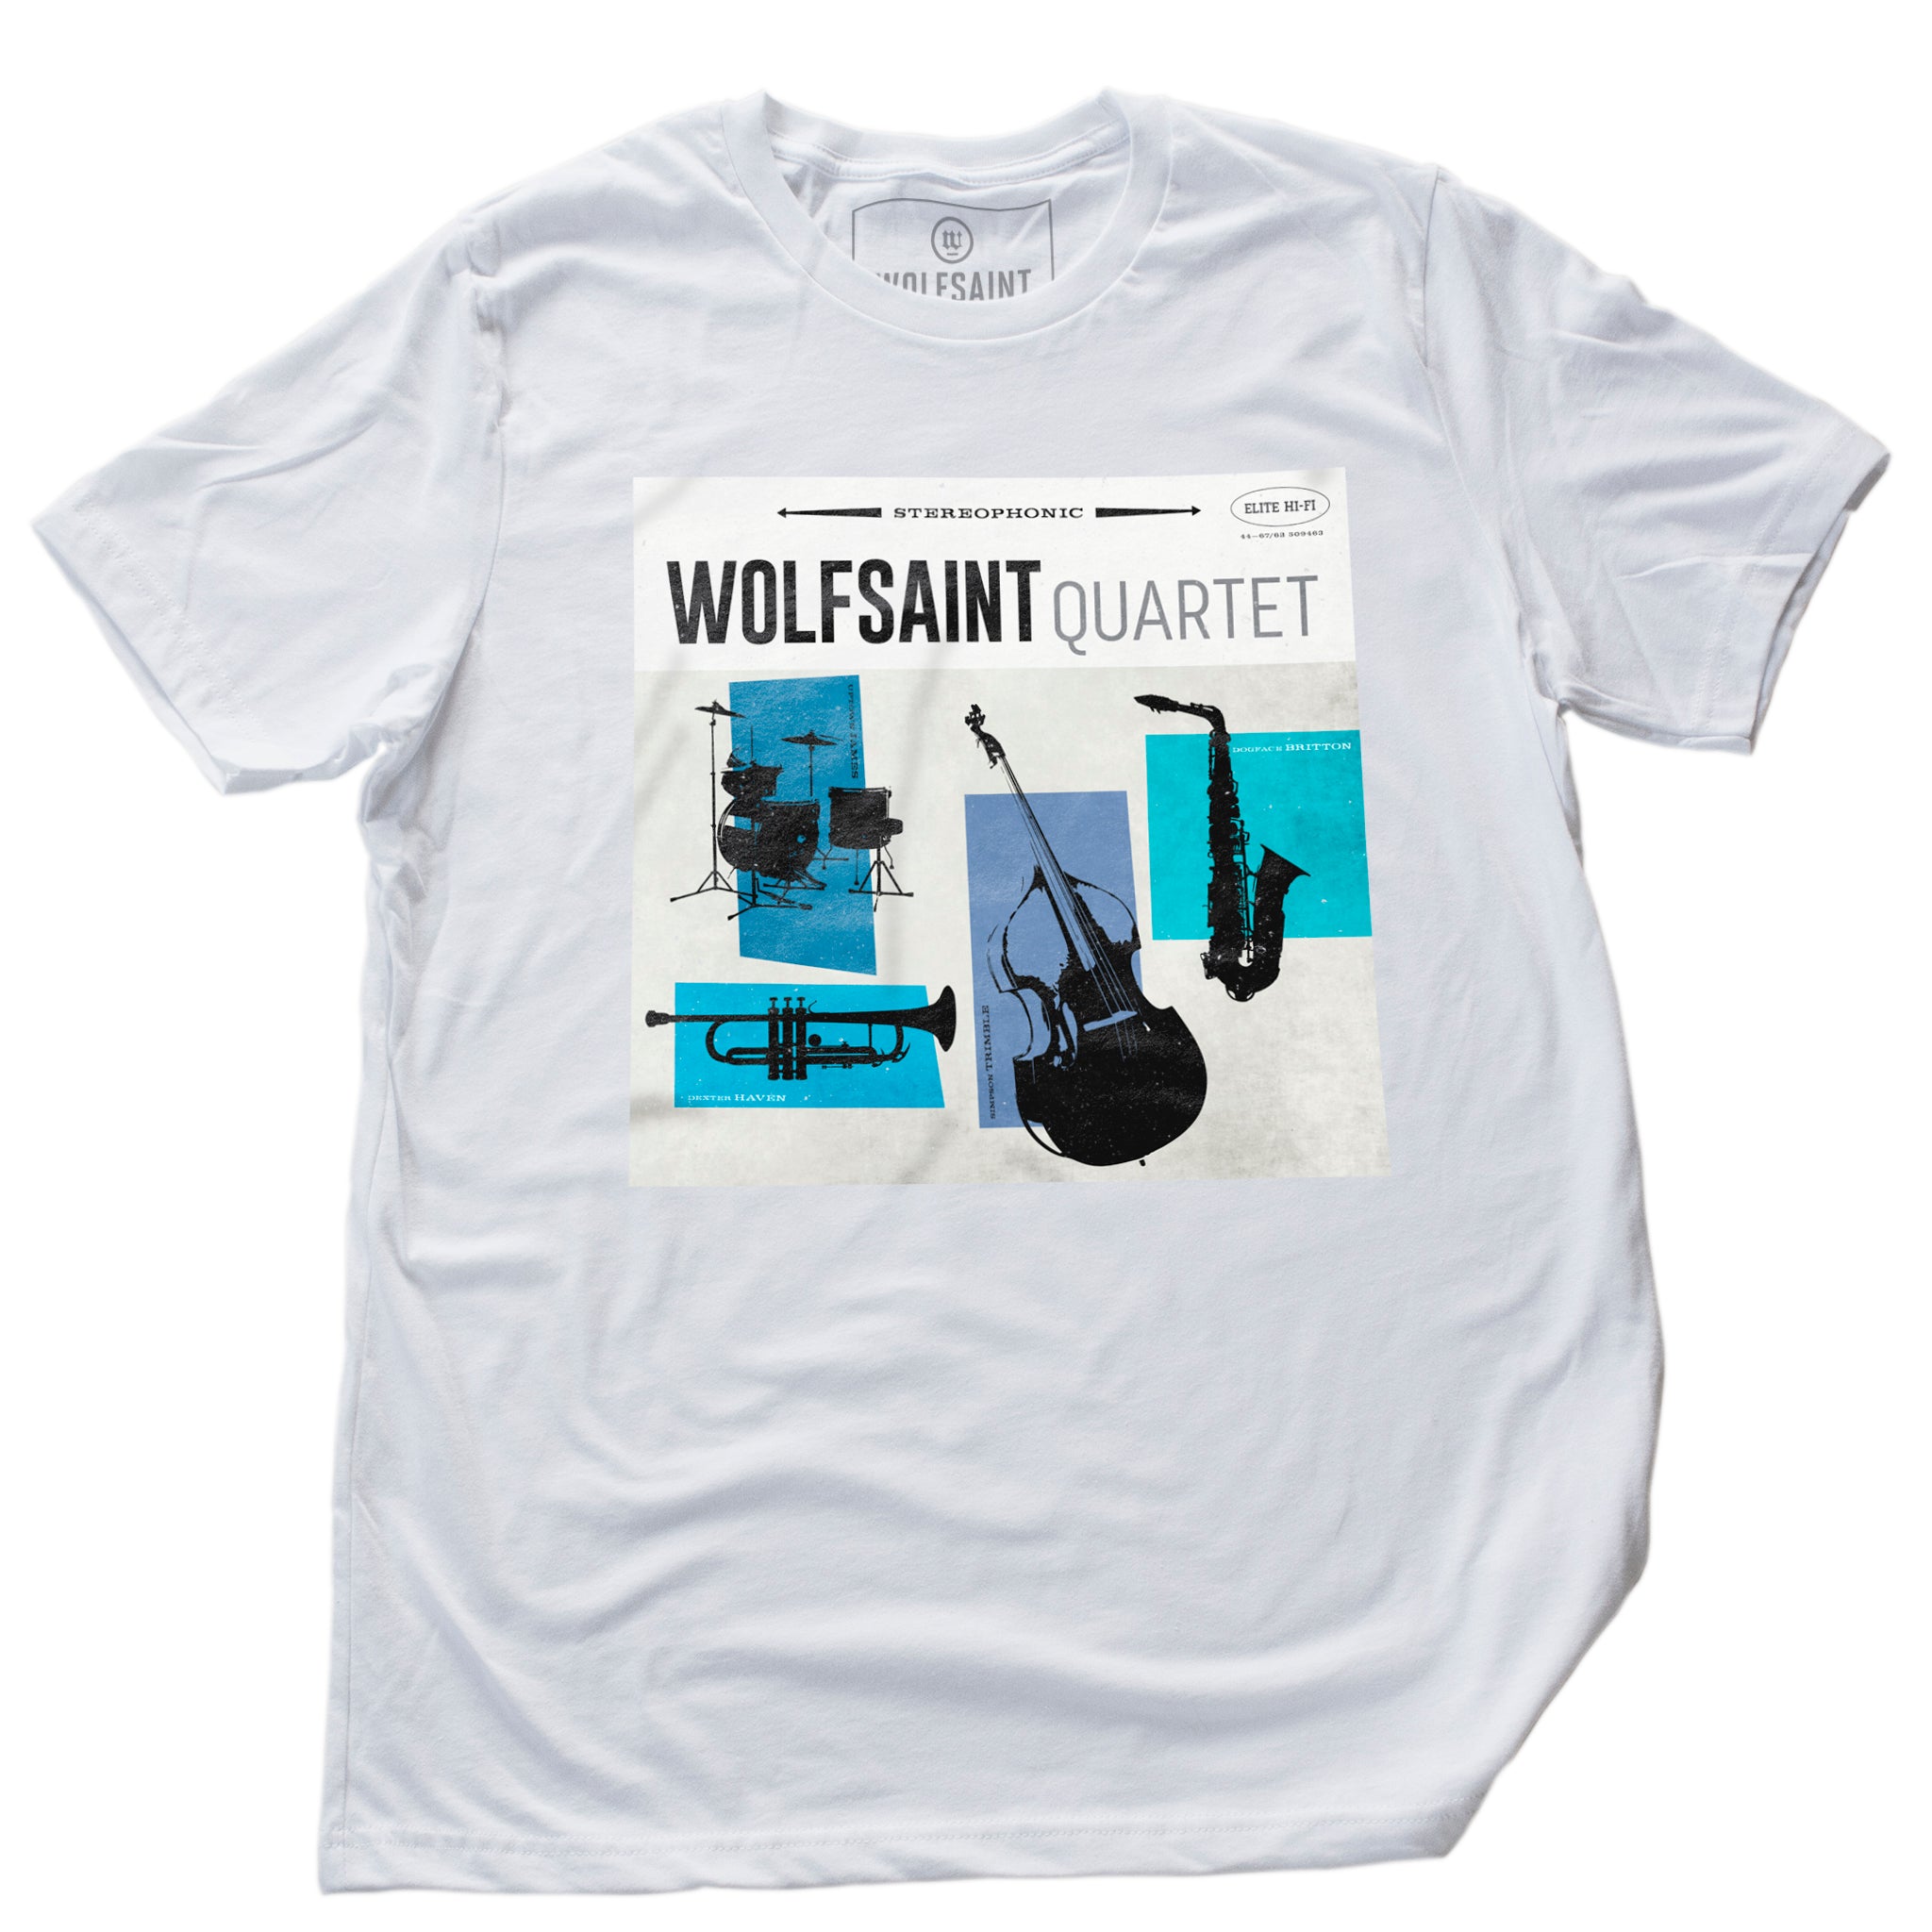 A white unisex fashion t-shirt celebrating 1950s jazz music with a vintage fiction album cover art with retro graphics of drums, saxophone, acoustic standup bass, and trumpet, for the Wolfsaint Quartet. From Wolfsaint.net